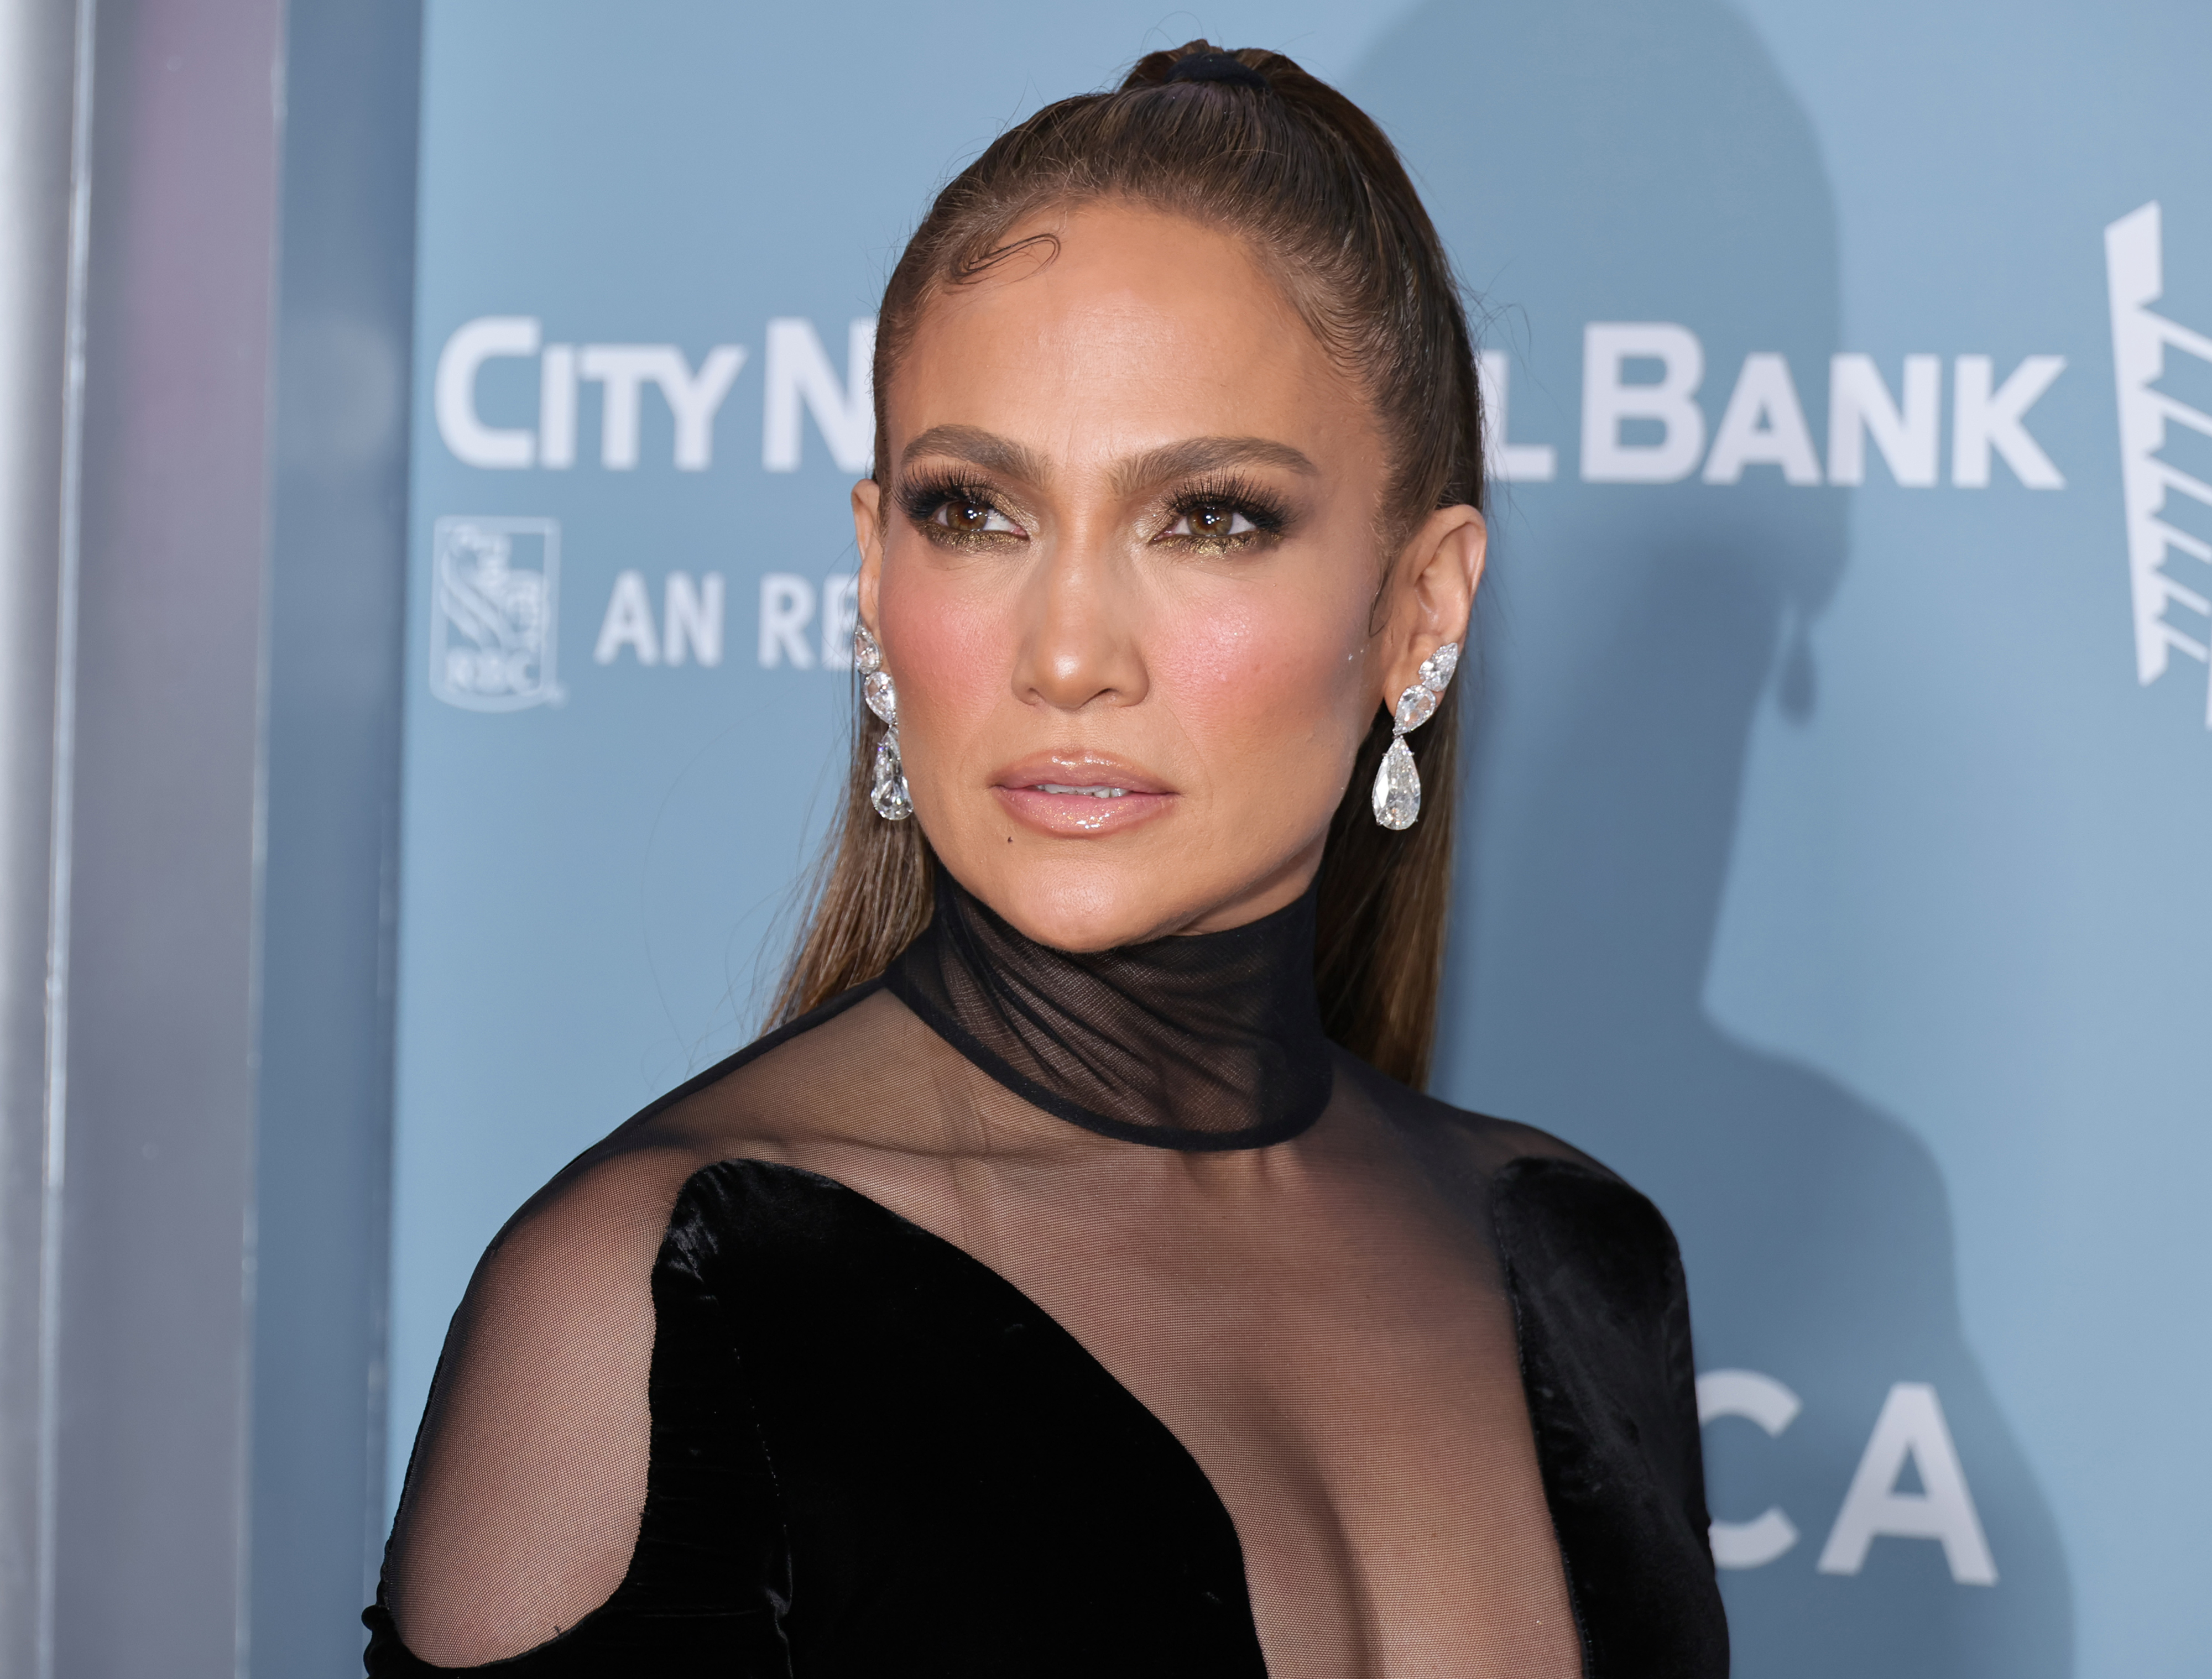 Close-up of JLo at a media event